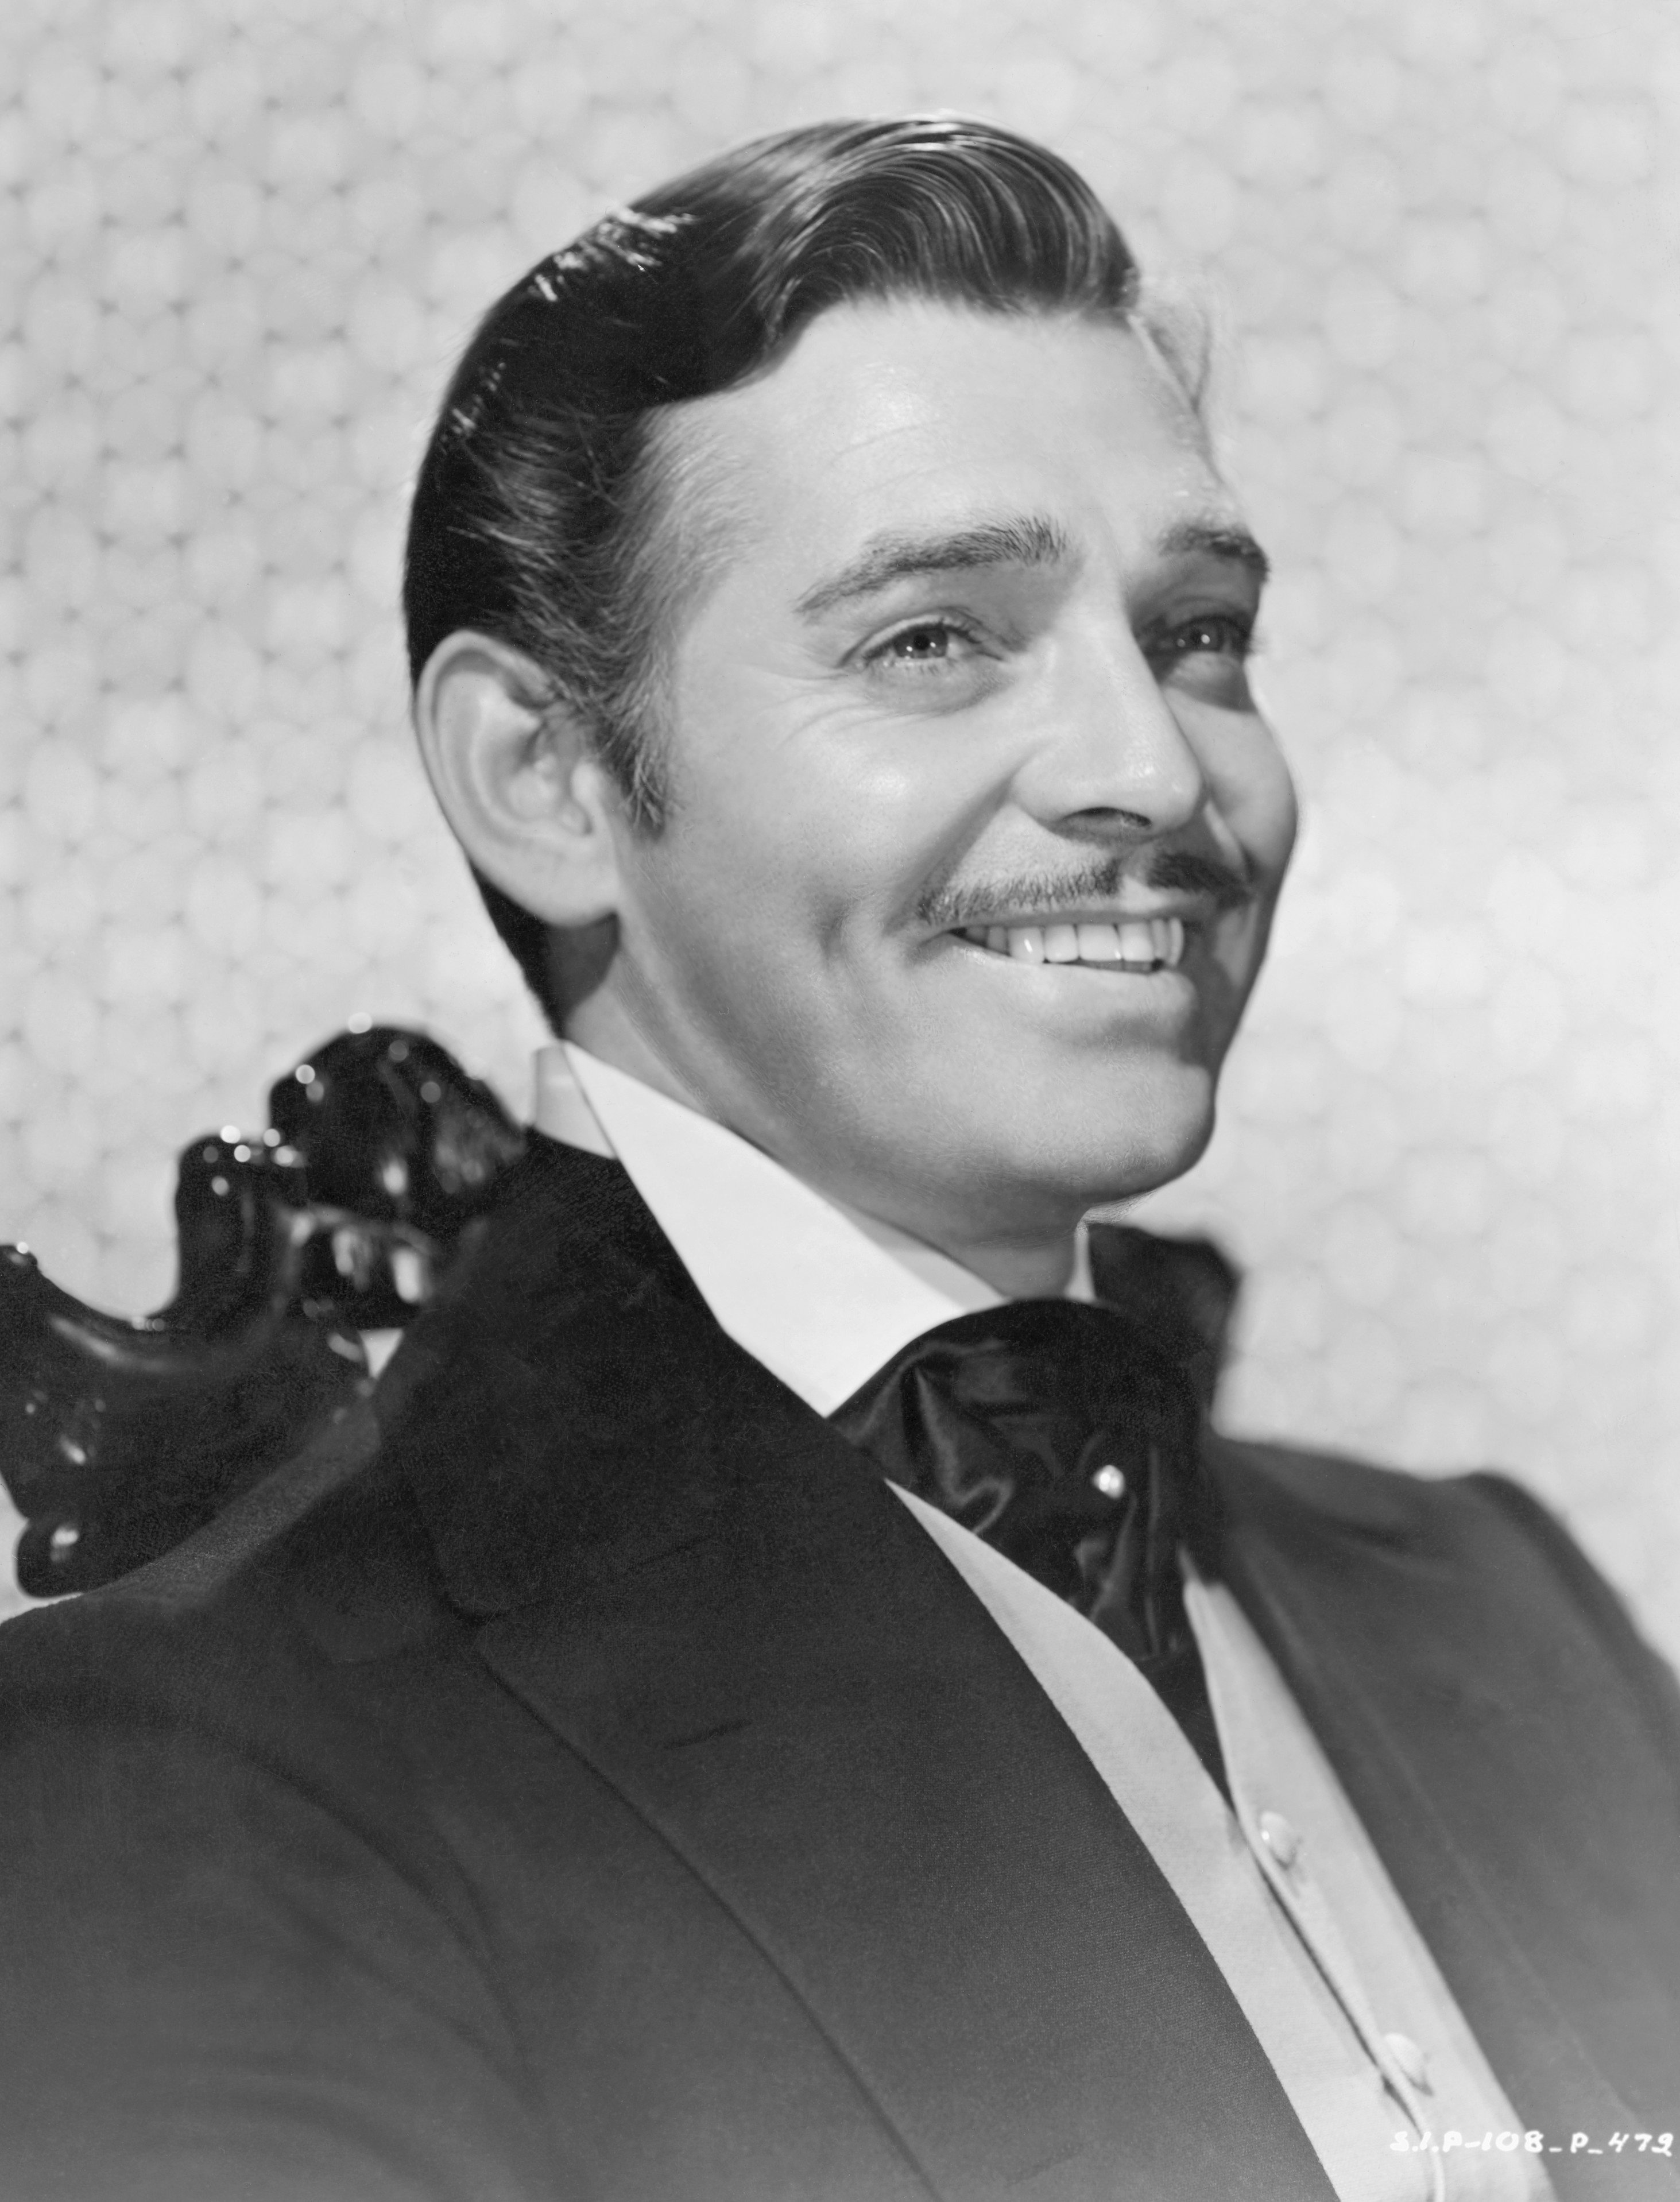 American actor Clark Gable (1901 - 1960) as he appears in 'Gone With The Wind', directed by Victor Fleming, 1939. | Source: Getty Images